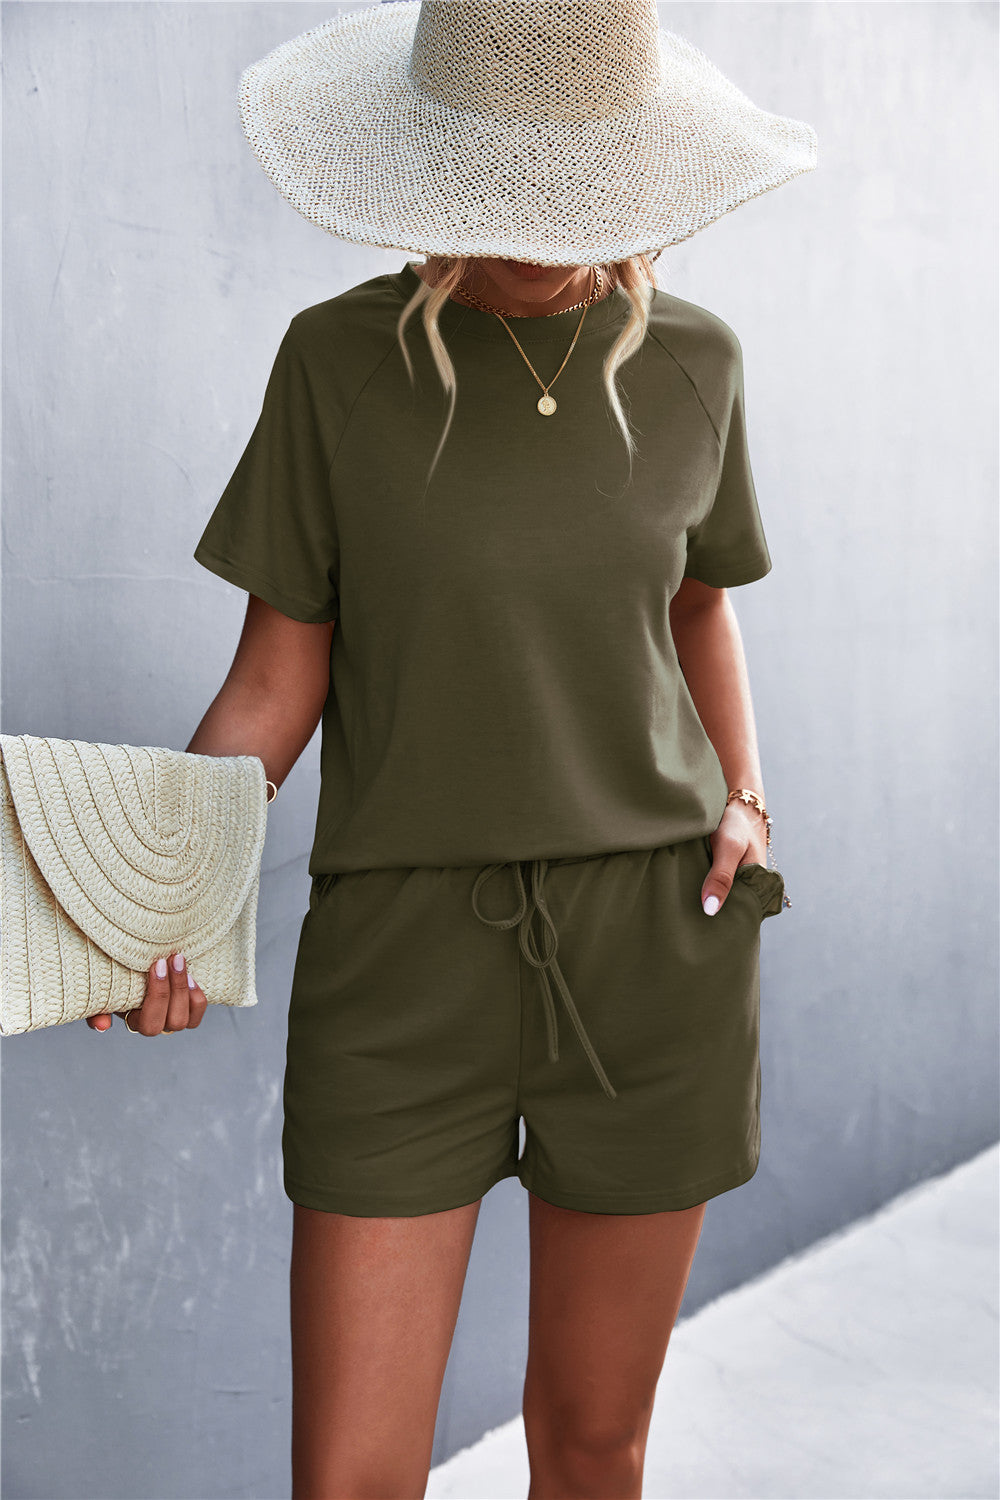 Raglan Sleeve Ruffle Hem Top and Shorts Set with Pockets  Sunset and Swim Army green S 